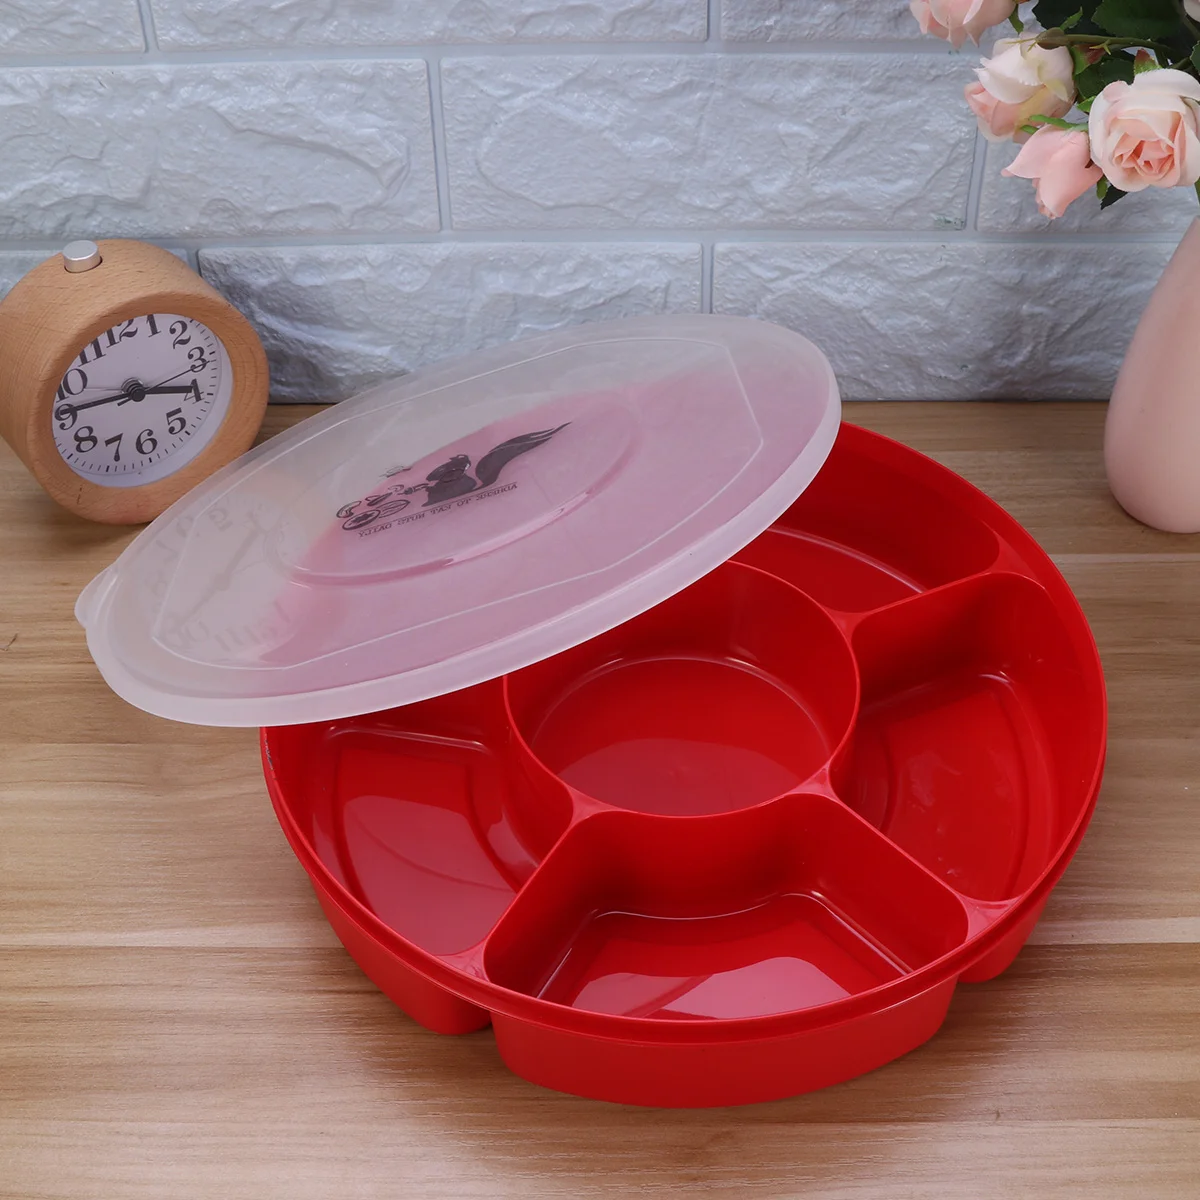 

Tray Serving Snack Fruit Candy Divided Box Plate Lid Platter Dish Appetizer Storage Dried Plates Nut Compartment Container